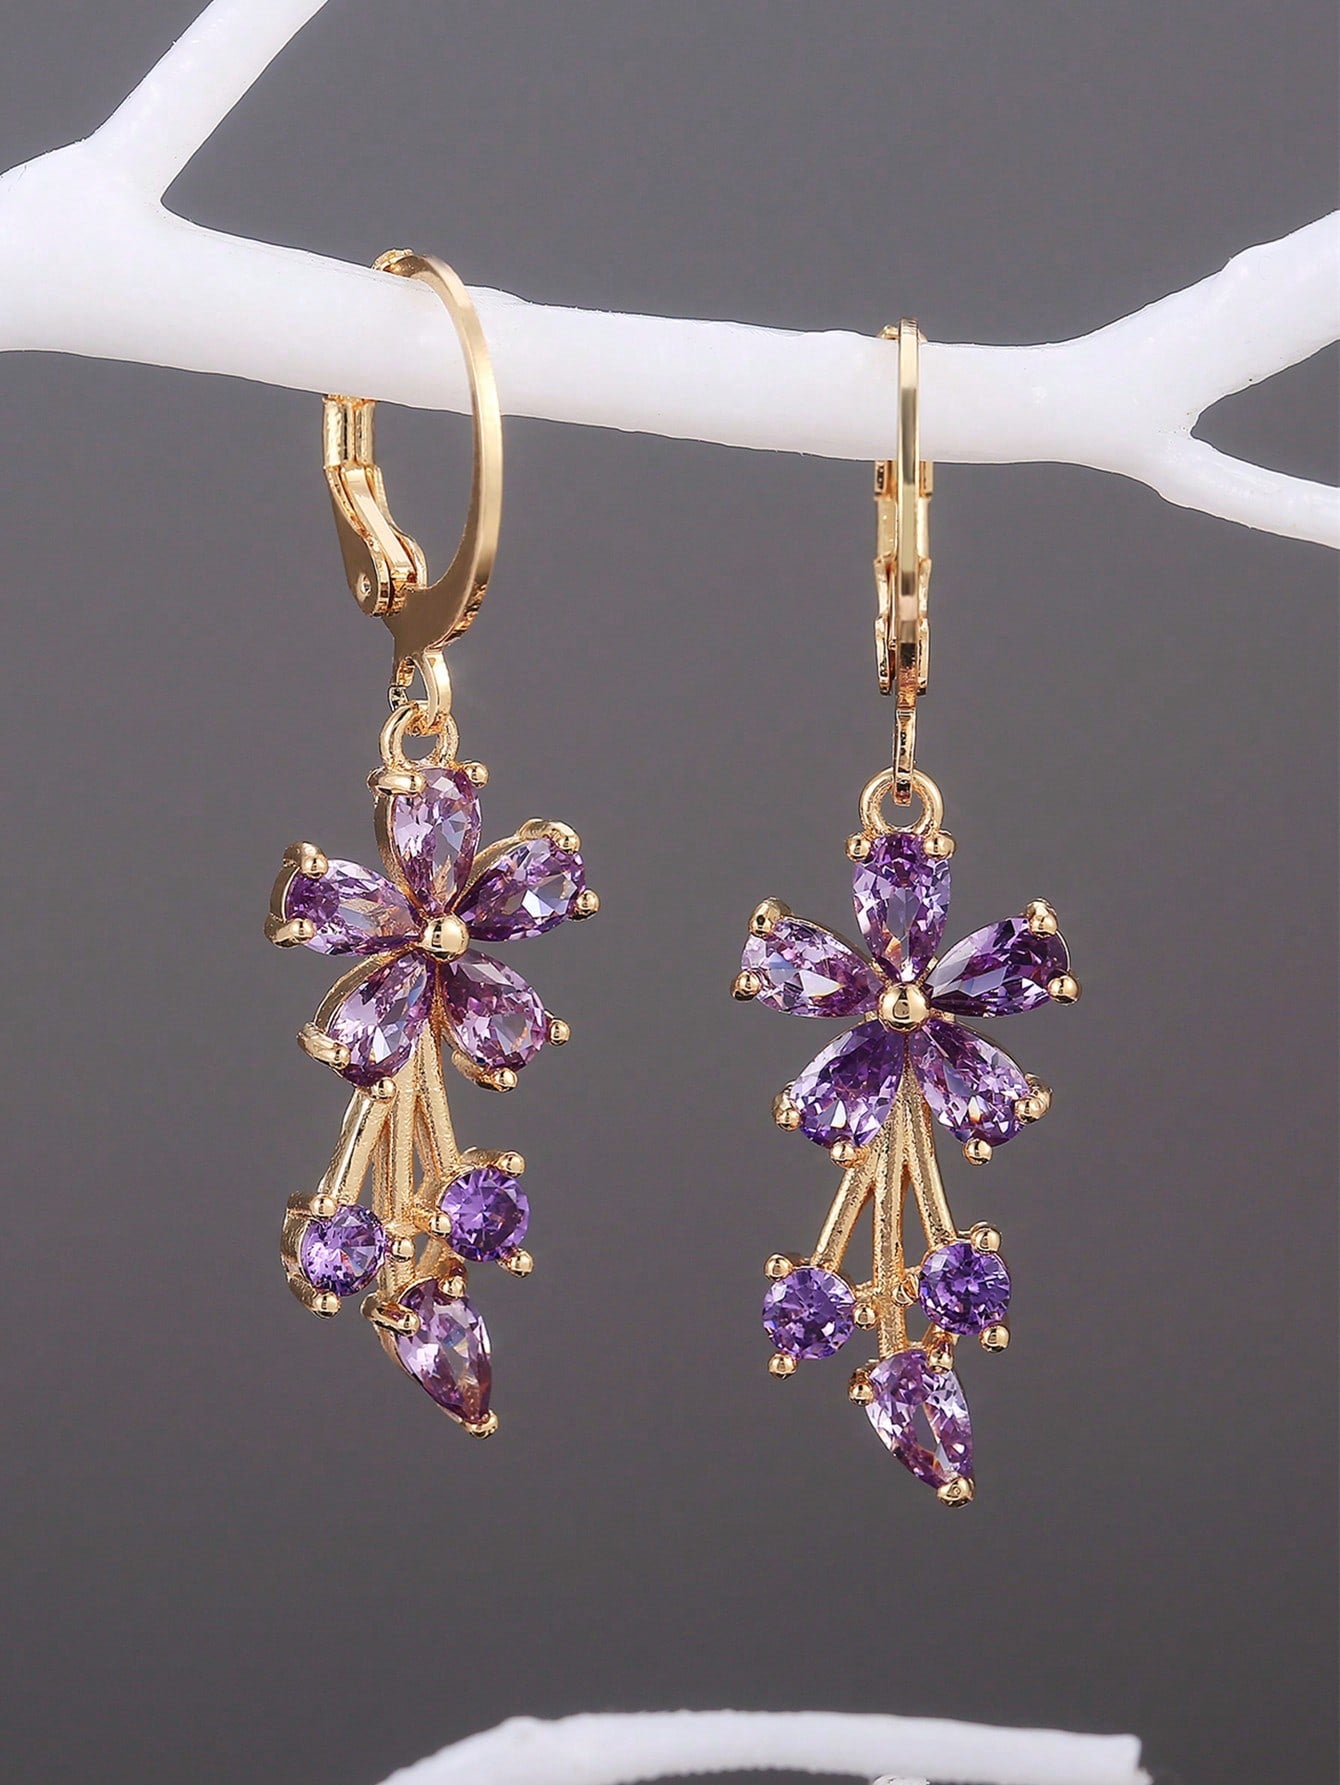 1pair Glamorous Cubic Zirconia Flower Drop Earrings For Women For Valentine's Day Gift